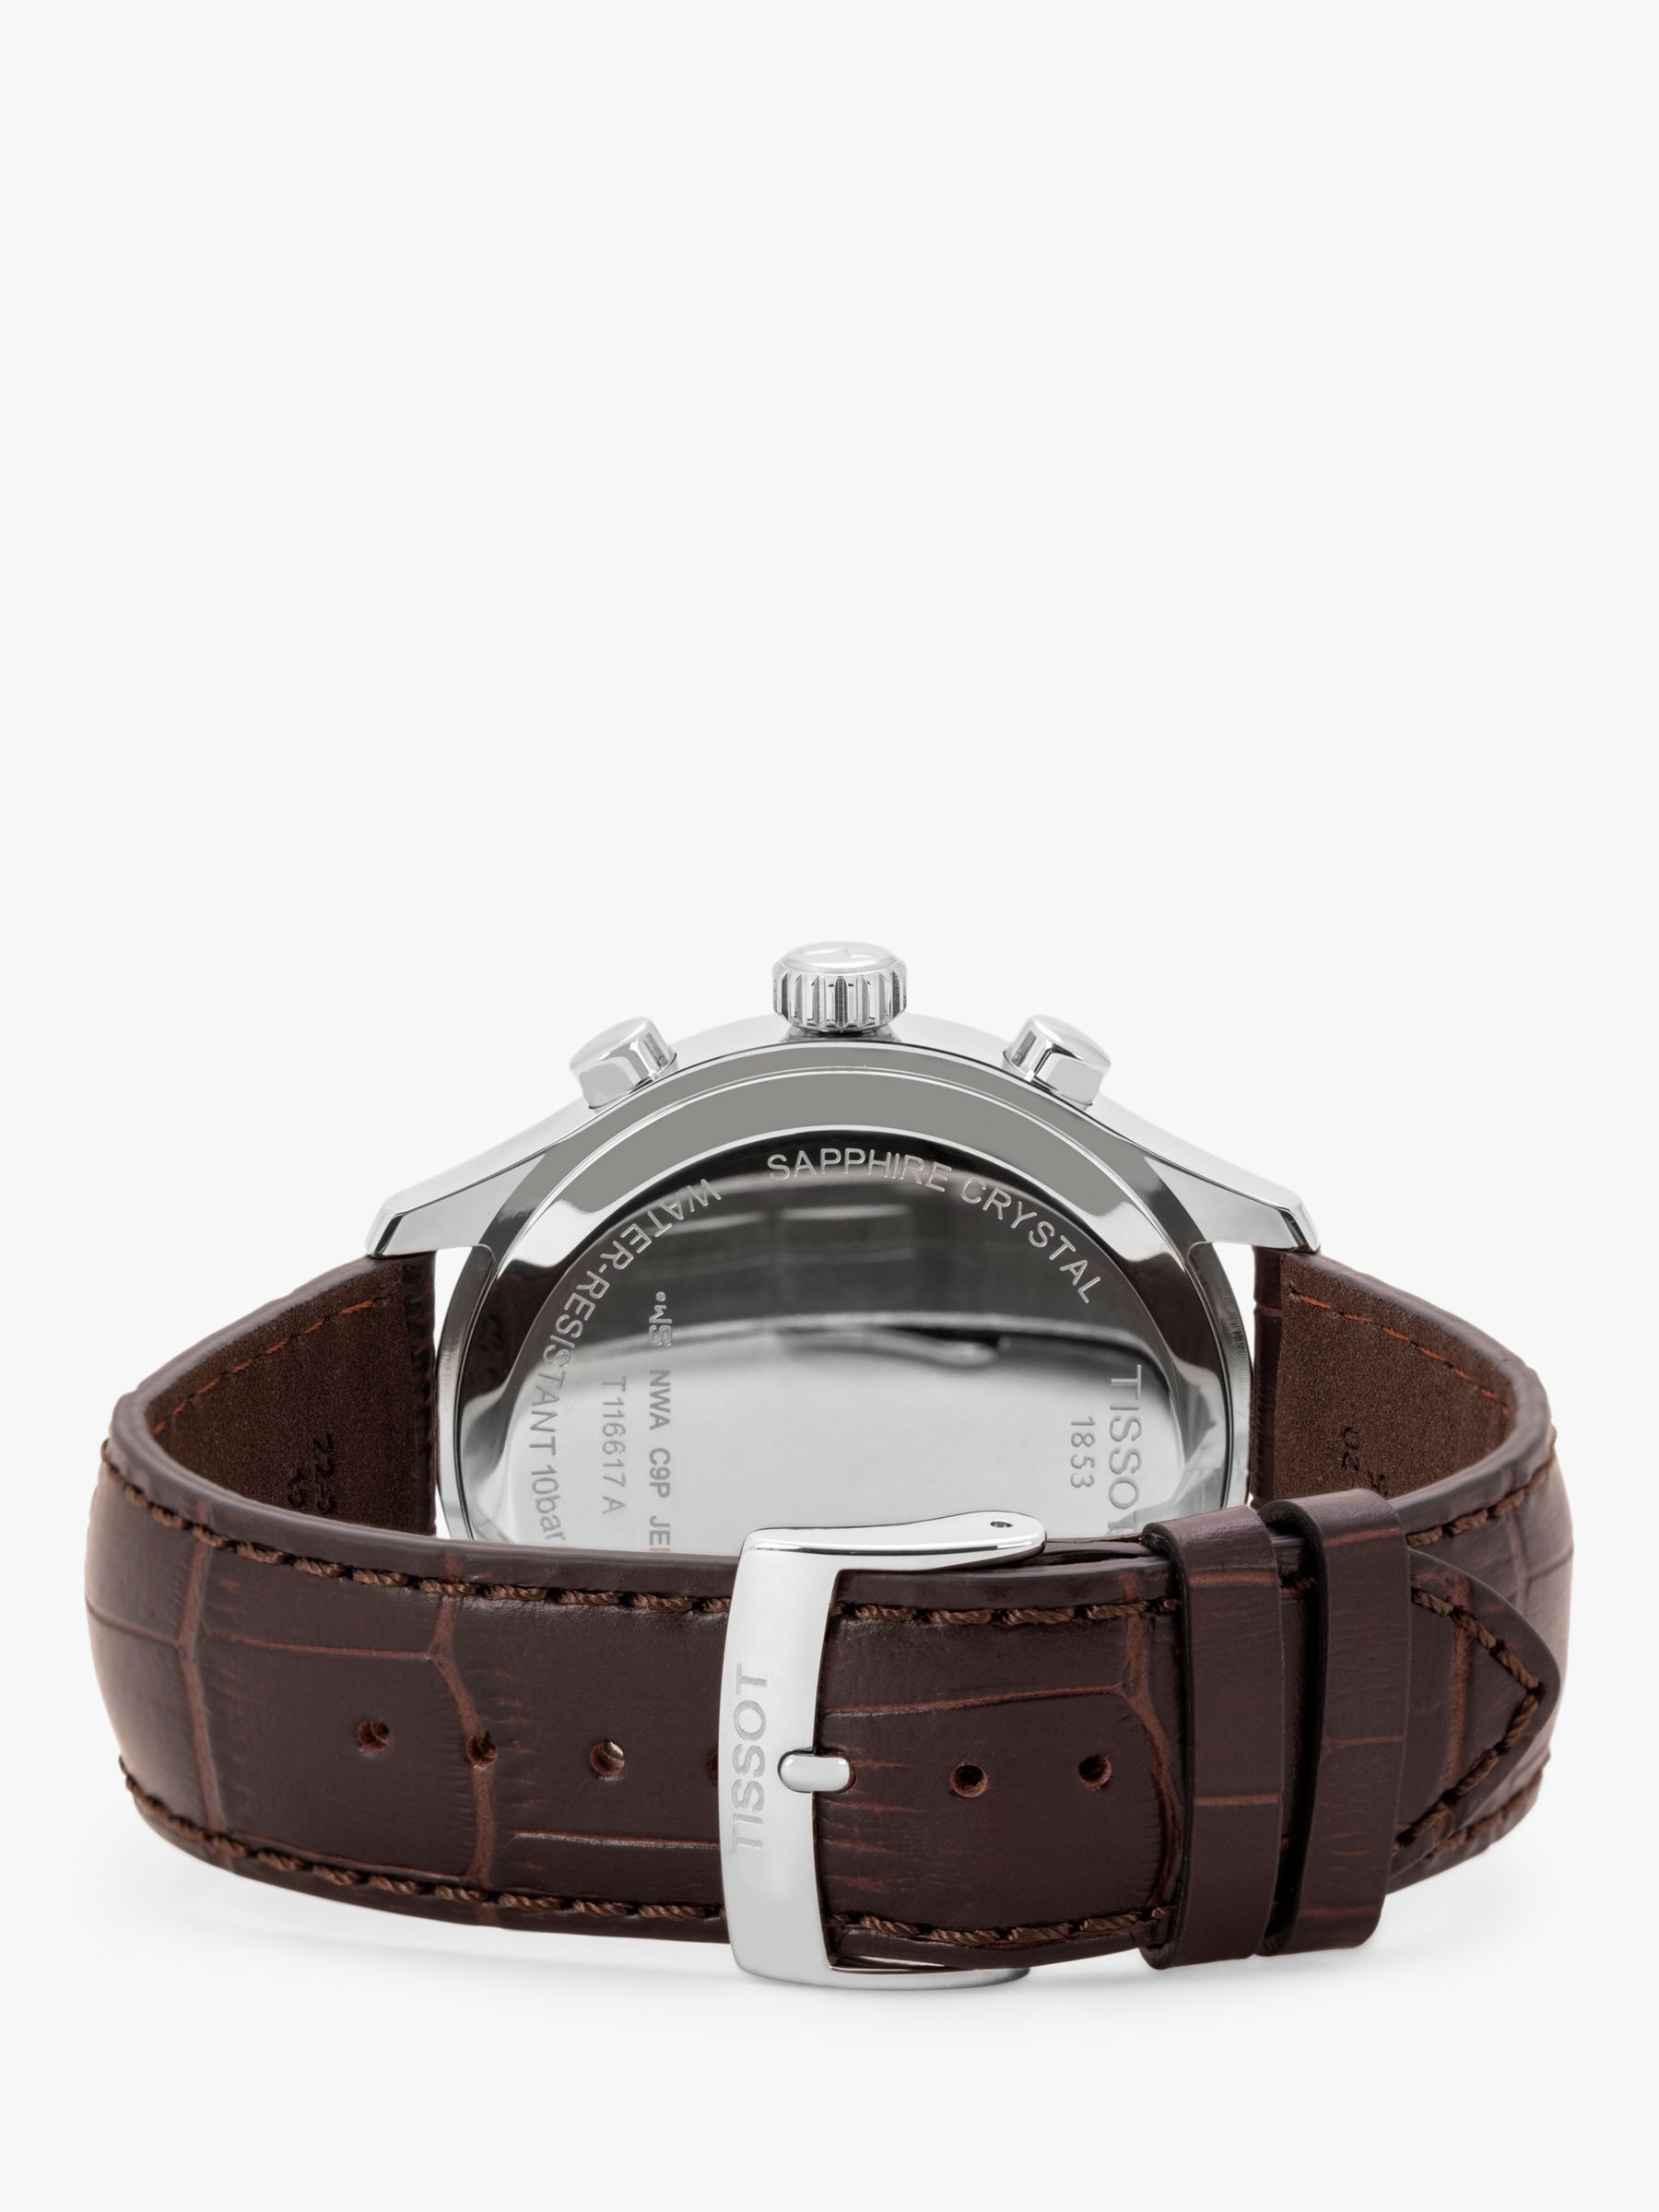 Tissot T1166171604700 Men's Classic Chronograph Date Leather Strap Watch, Brown/Blue